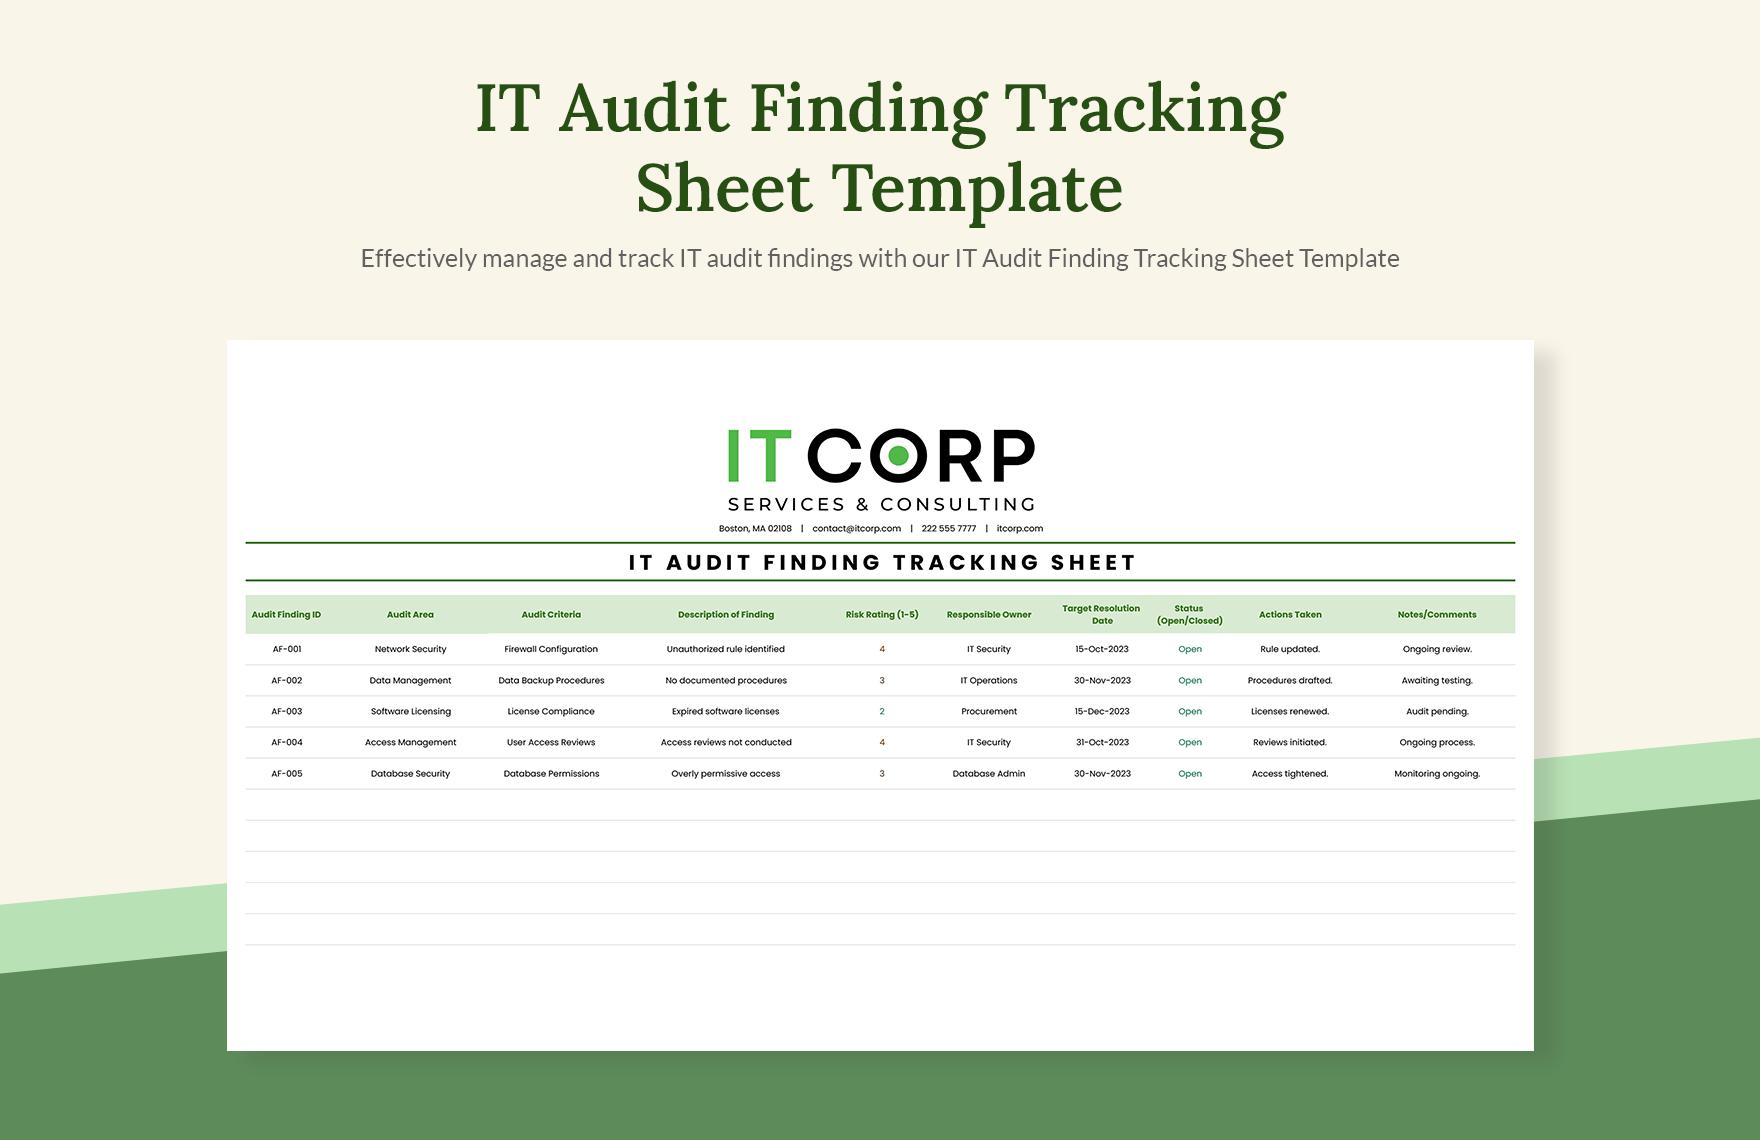 IT Audit Finding Tracking Sheet Template in Excel, Google Sheets